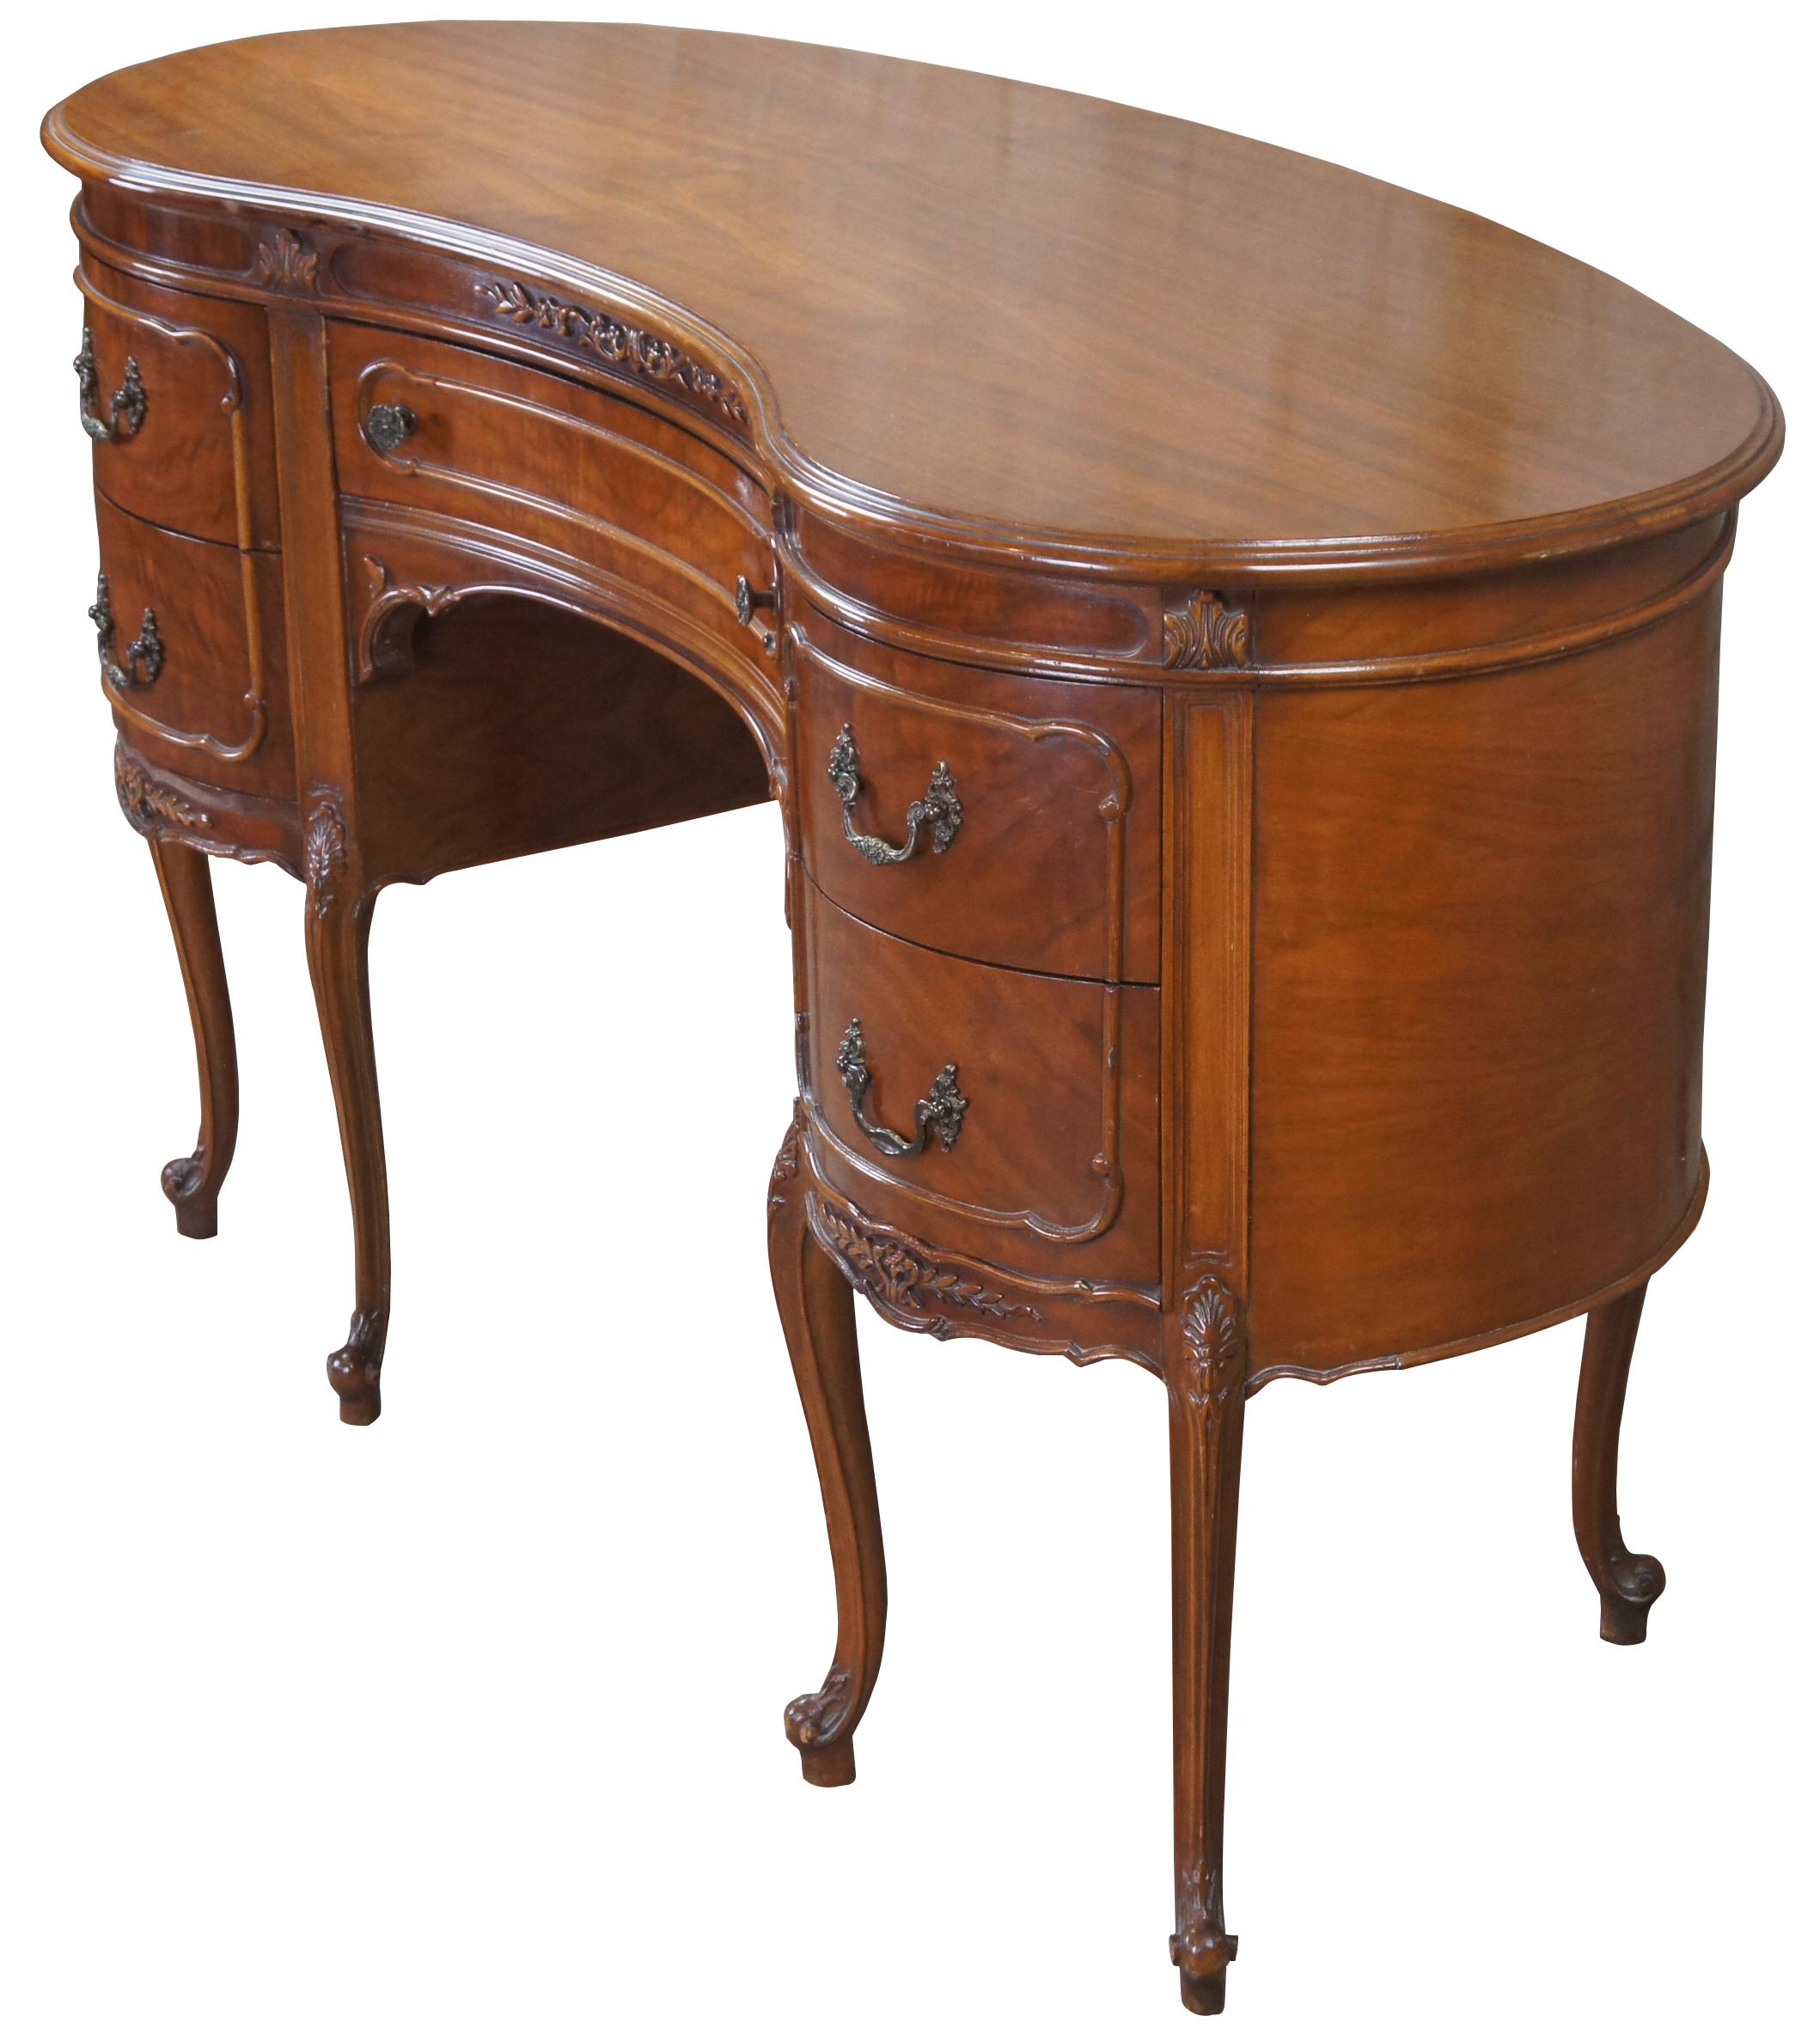 1940s kidney bean or crescent shaped writing desk. Made from walnut with crotch veneer along the front. Features French styling with carved foliate accents and five drawers supported by six cabriole legs over scrolled feet. Includes glass tops.